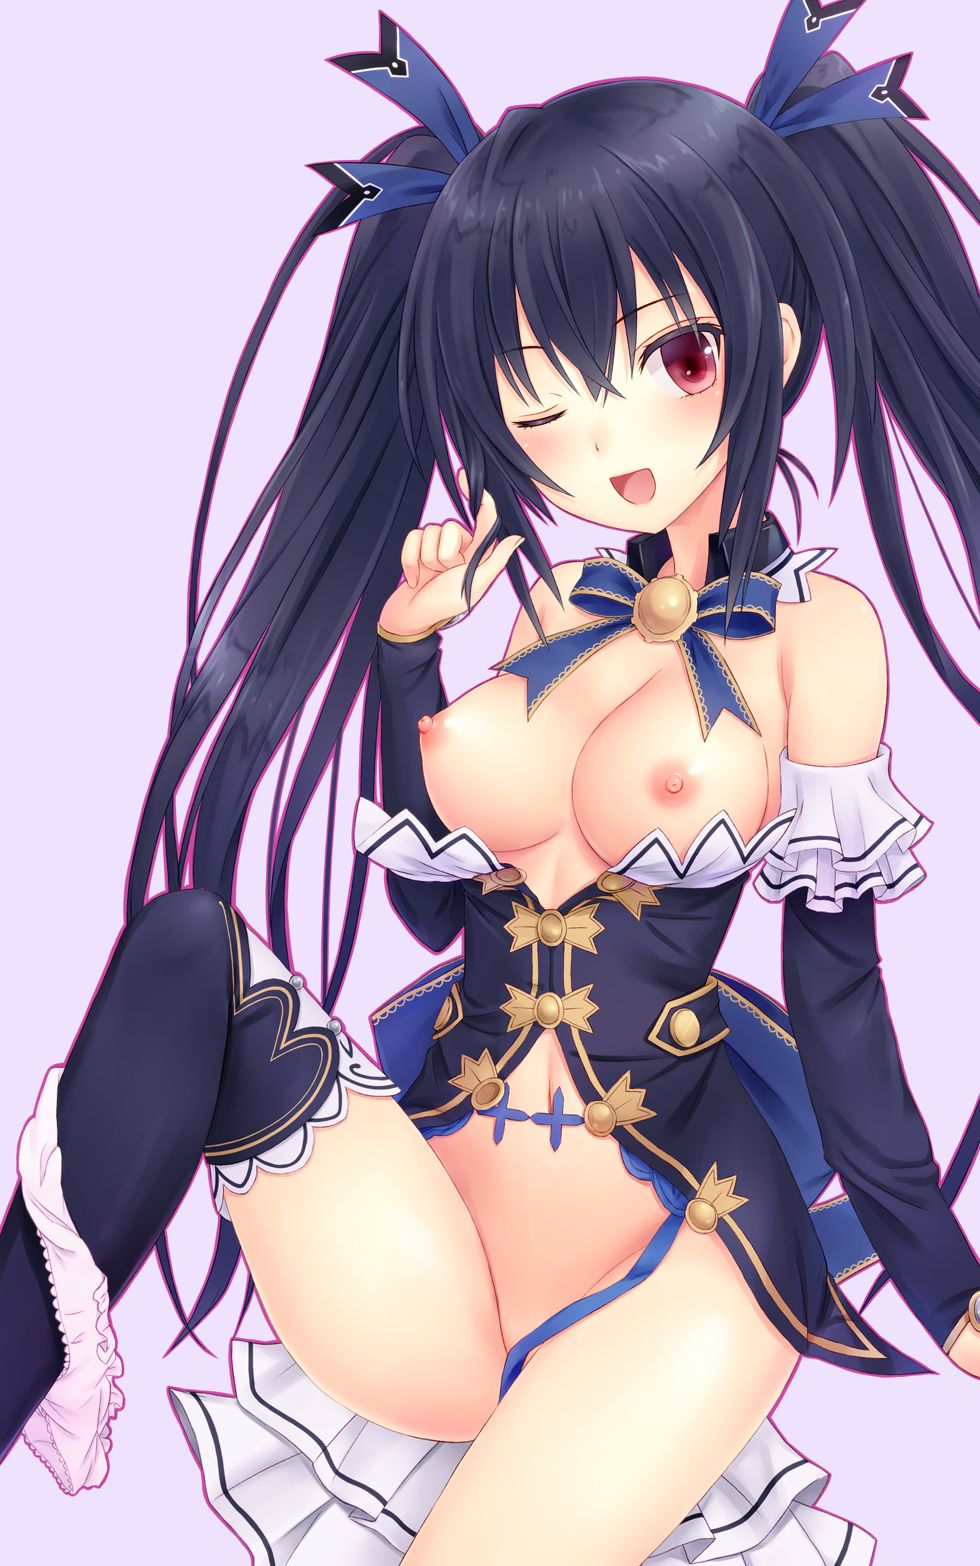 [2D] Super d nepgear character Super dimension erotic pictures, www (32 photos) 10